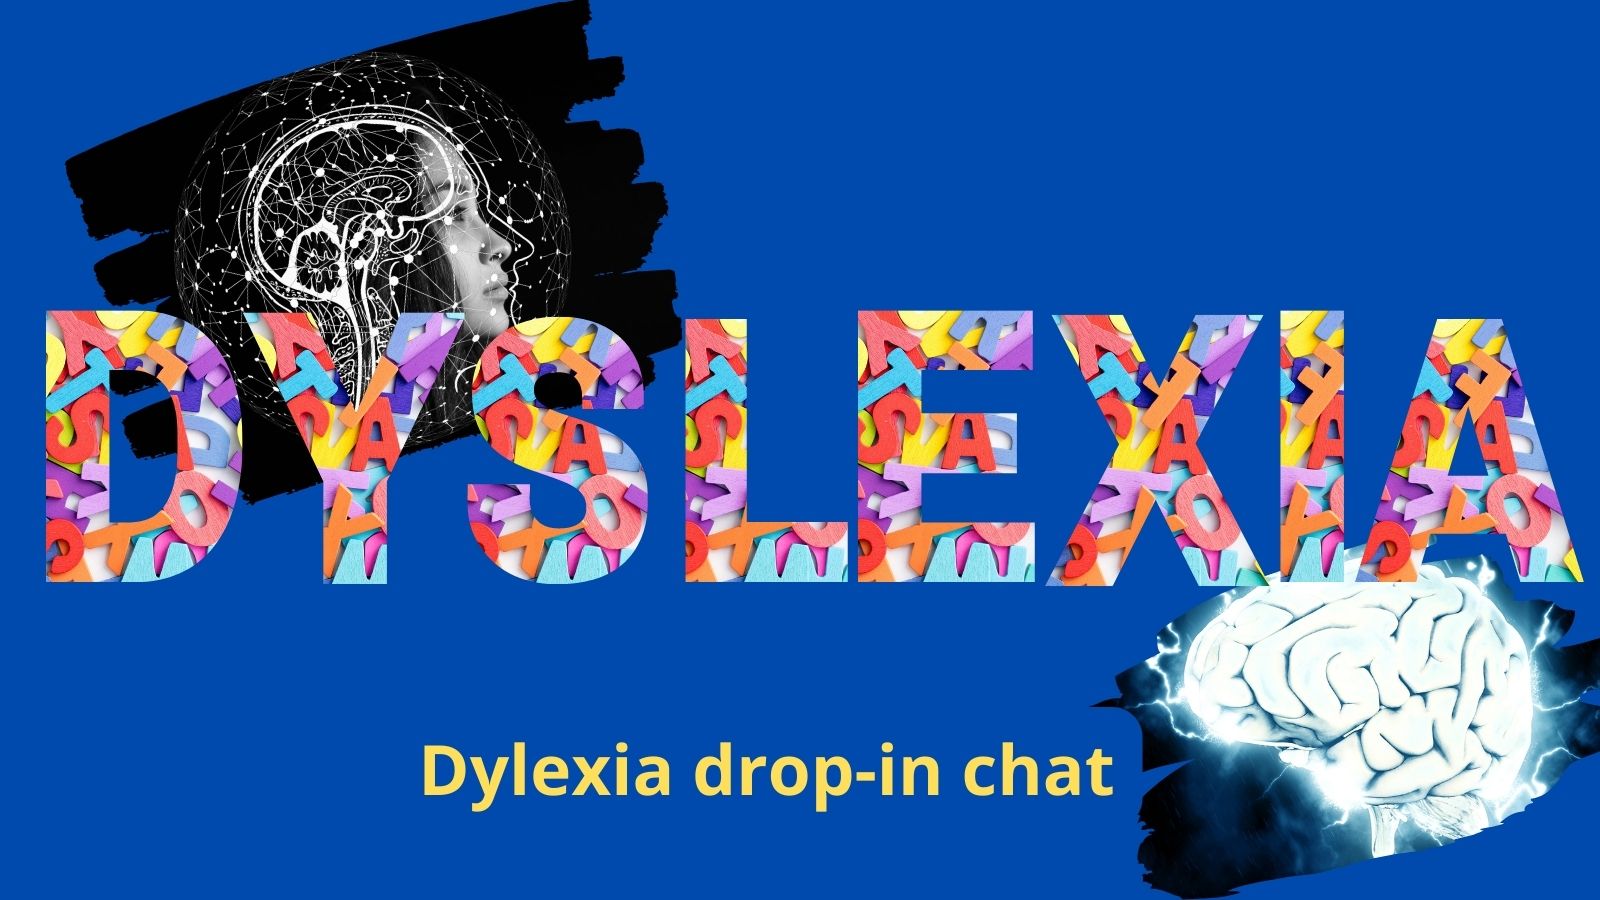 Dyslexia drop-in chat